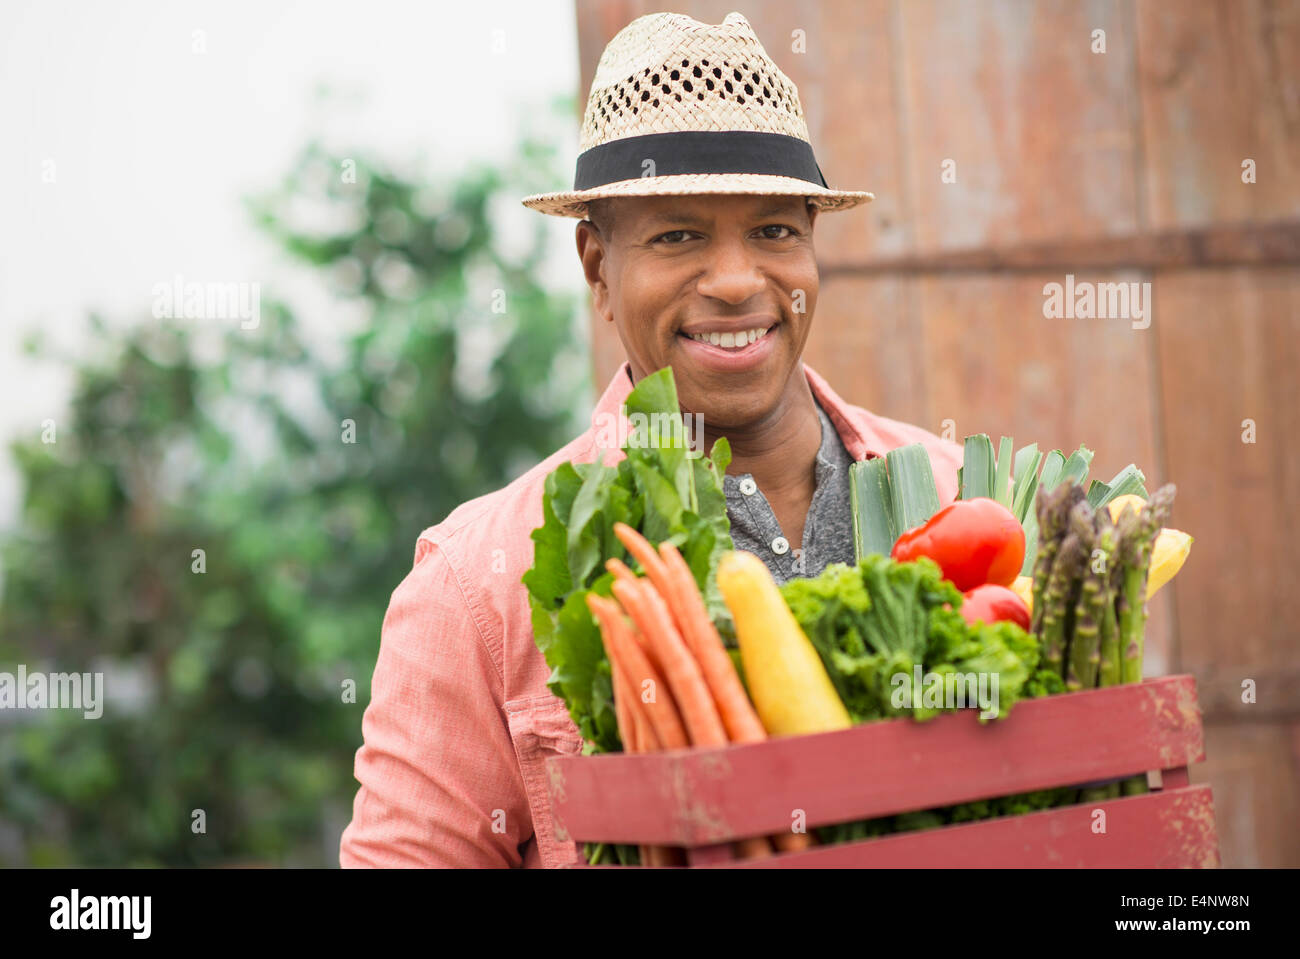 Portrait of man carrying crate full of fresh vegetables Stock Photo